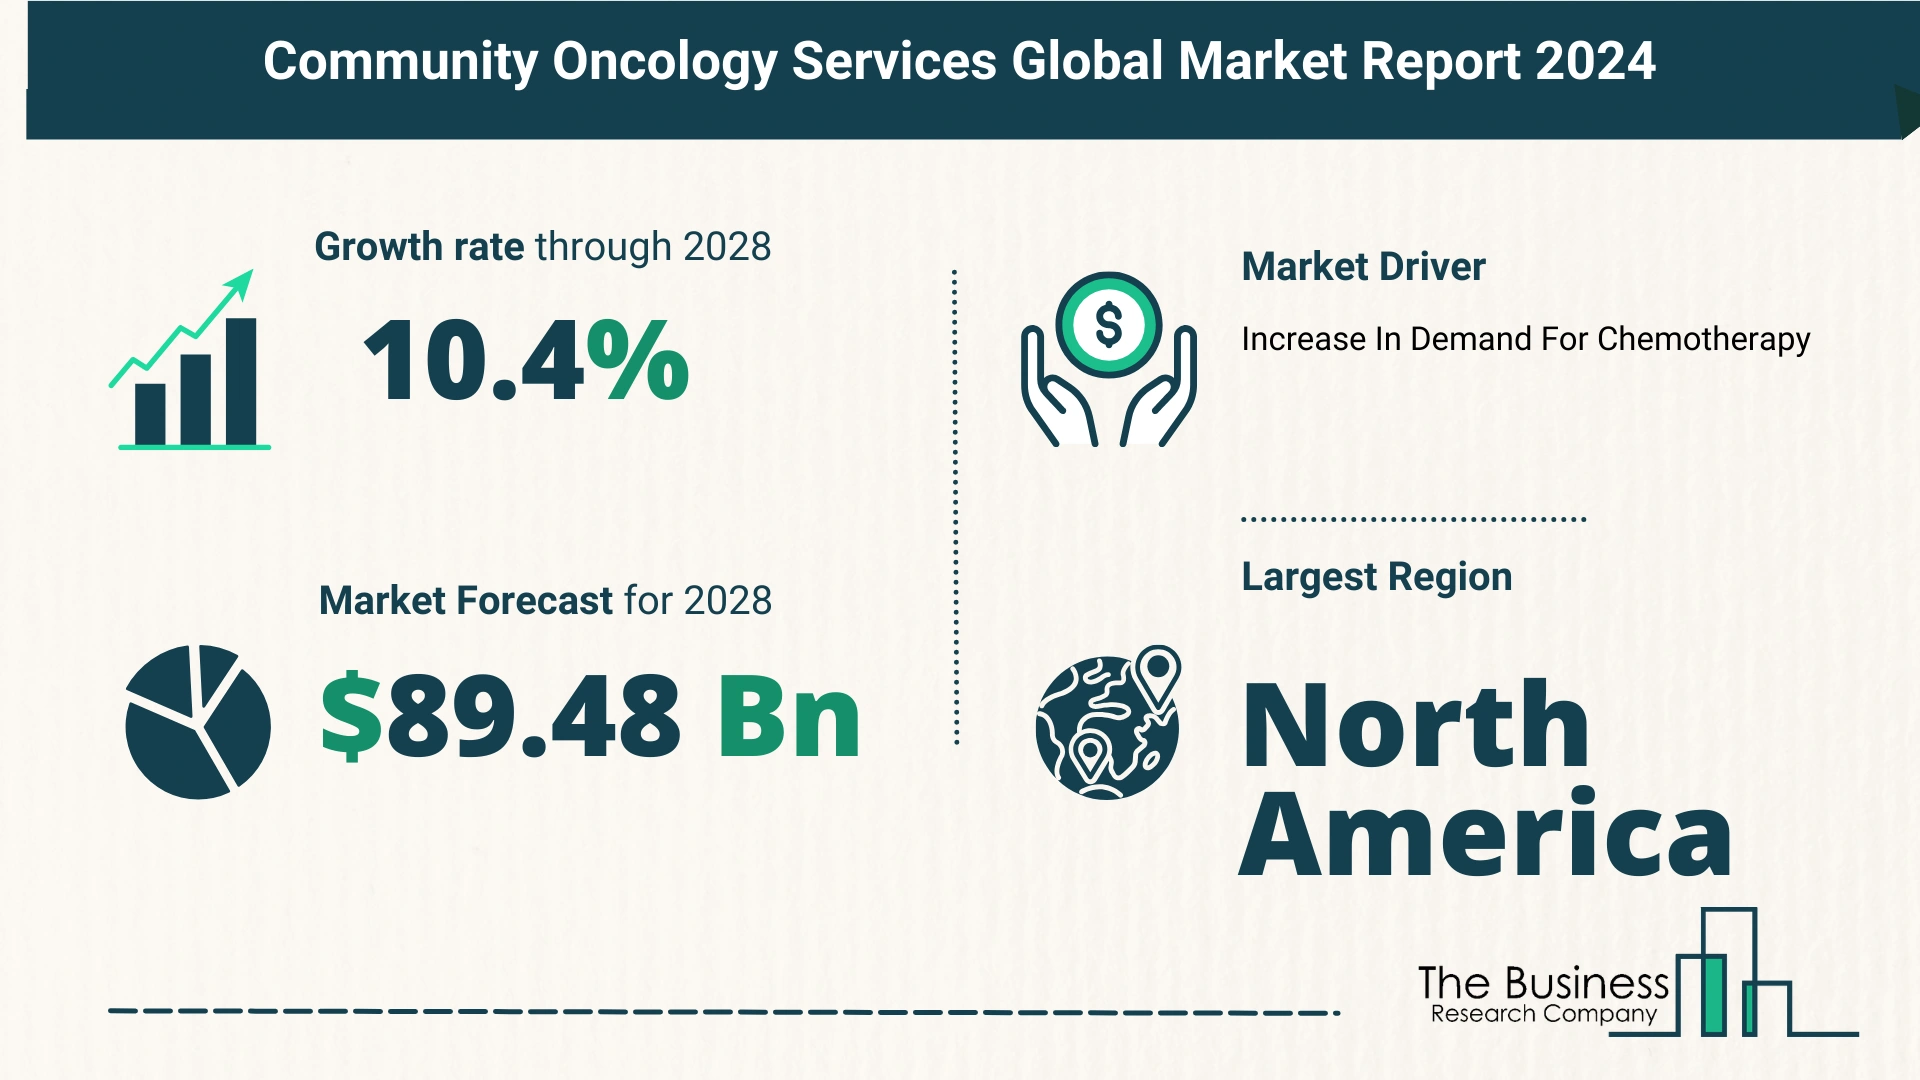 Key Takeaways From The Global Community Oncology Services Market Forecast 2024